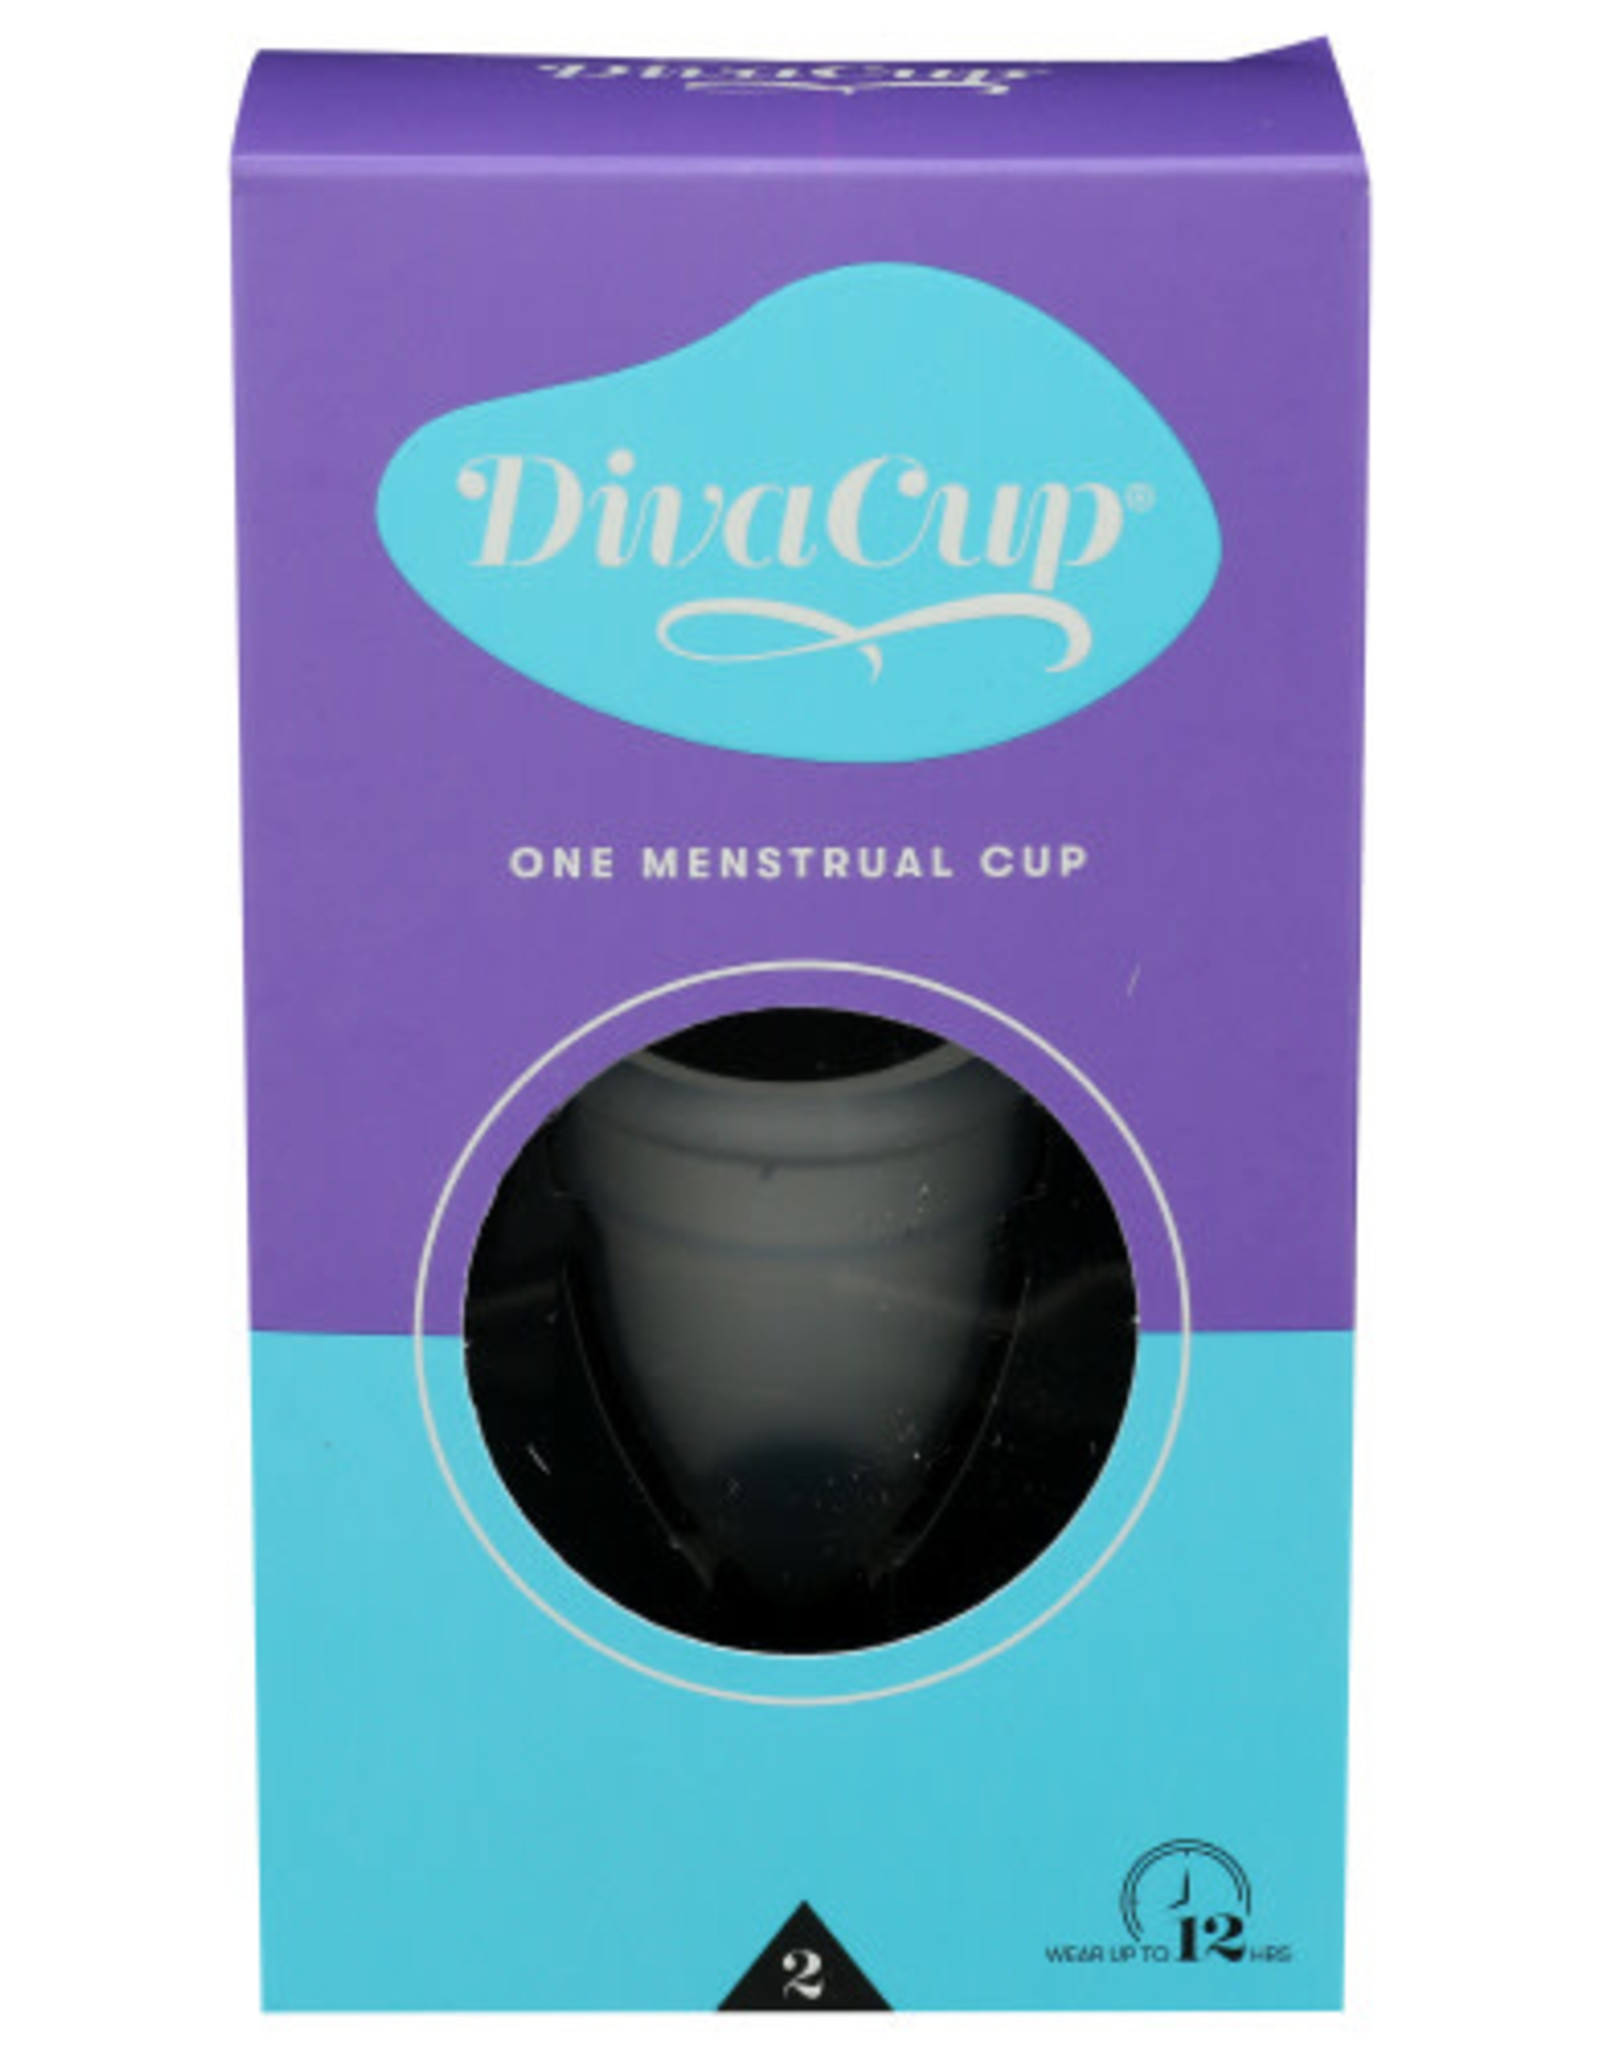 THE DIVA CUP® THE DIVACUP MODEL 2, FEMININE HYGIENE MENSTRUAL CUP, 1 COUNT